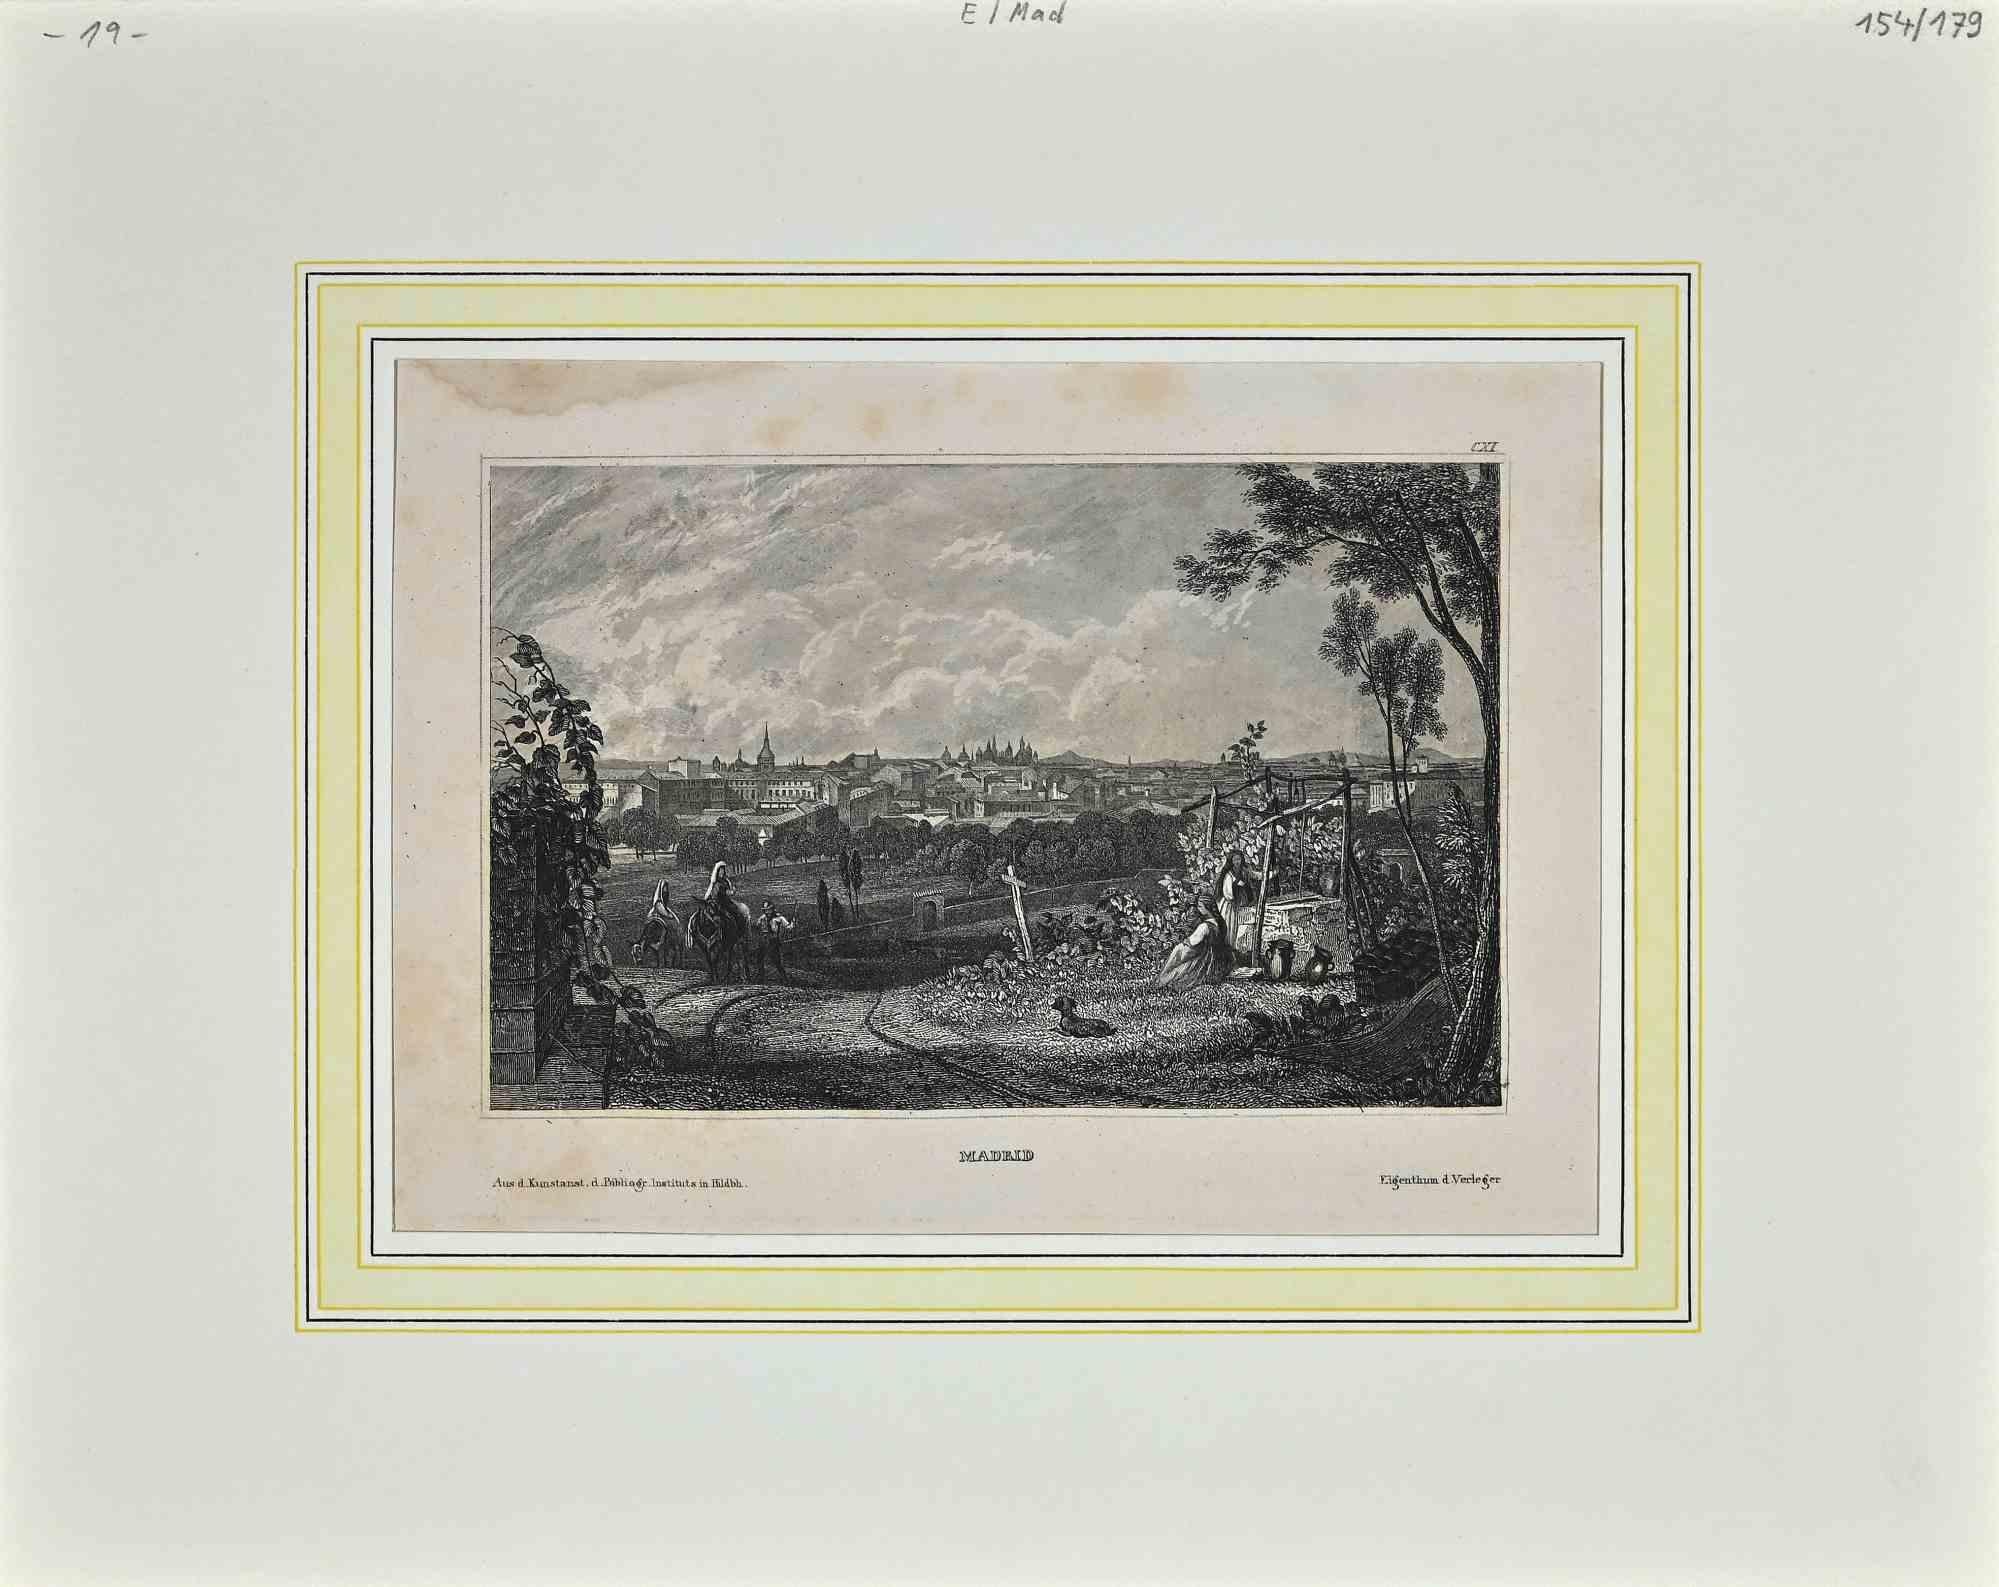 Ancient View of Madrid is an original lithograph on paper realized by Eigenthum d. Verleger in The 19th Century.

Signed on the plate on the lower right corner.

Original lithograph on paper. 

Titled on the lower center.

Good condition with a